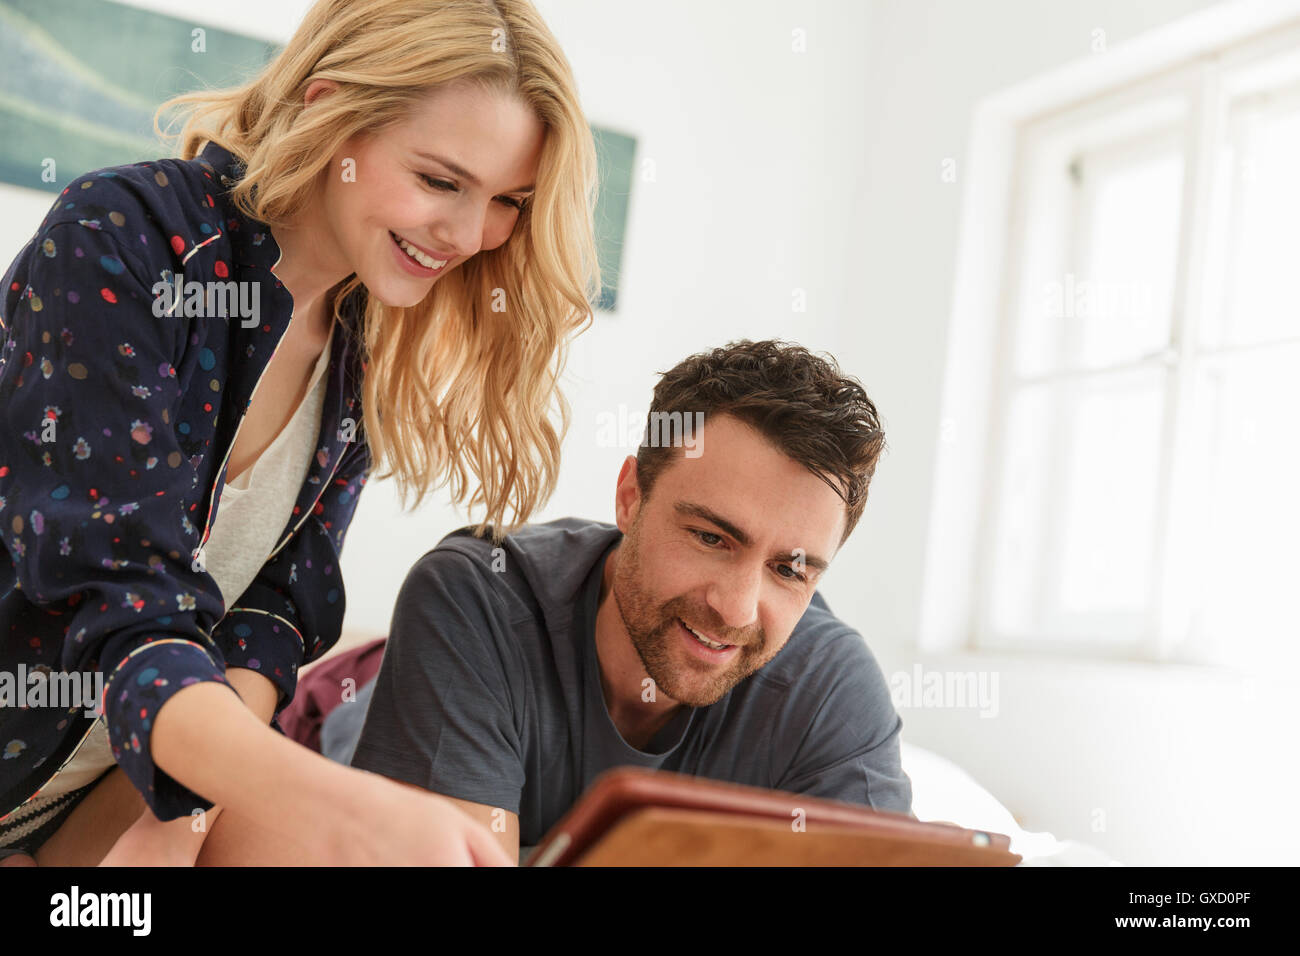 Couple using digital tablet smiling Stock Photo